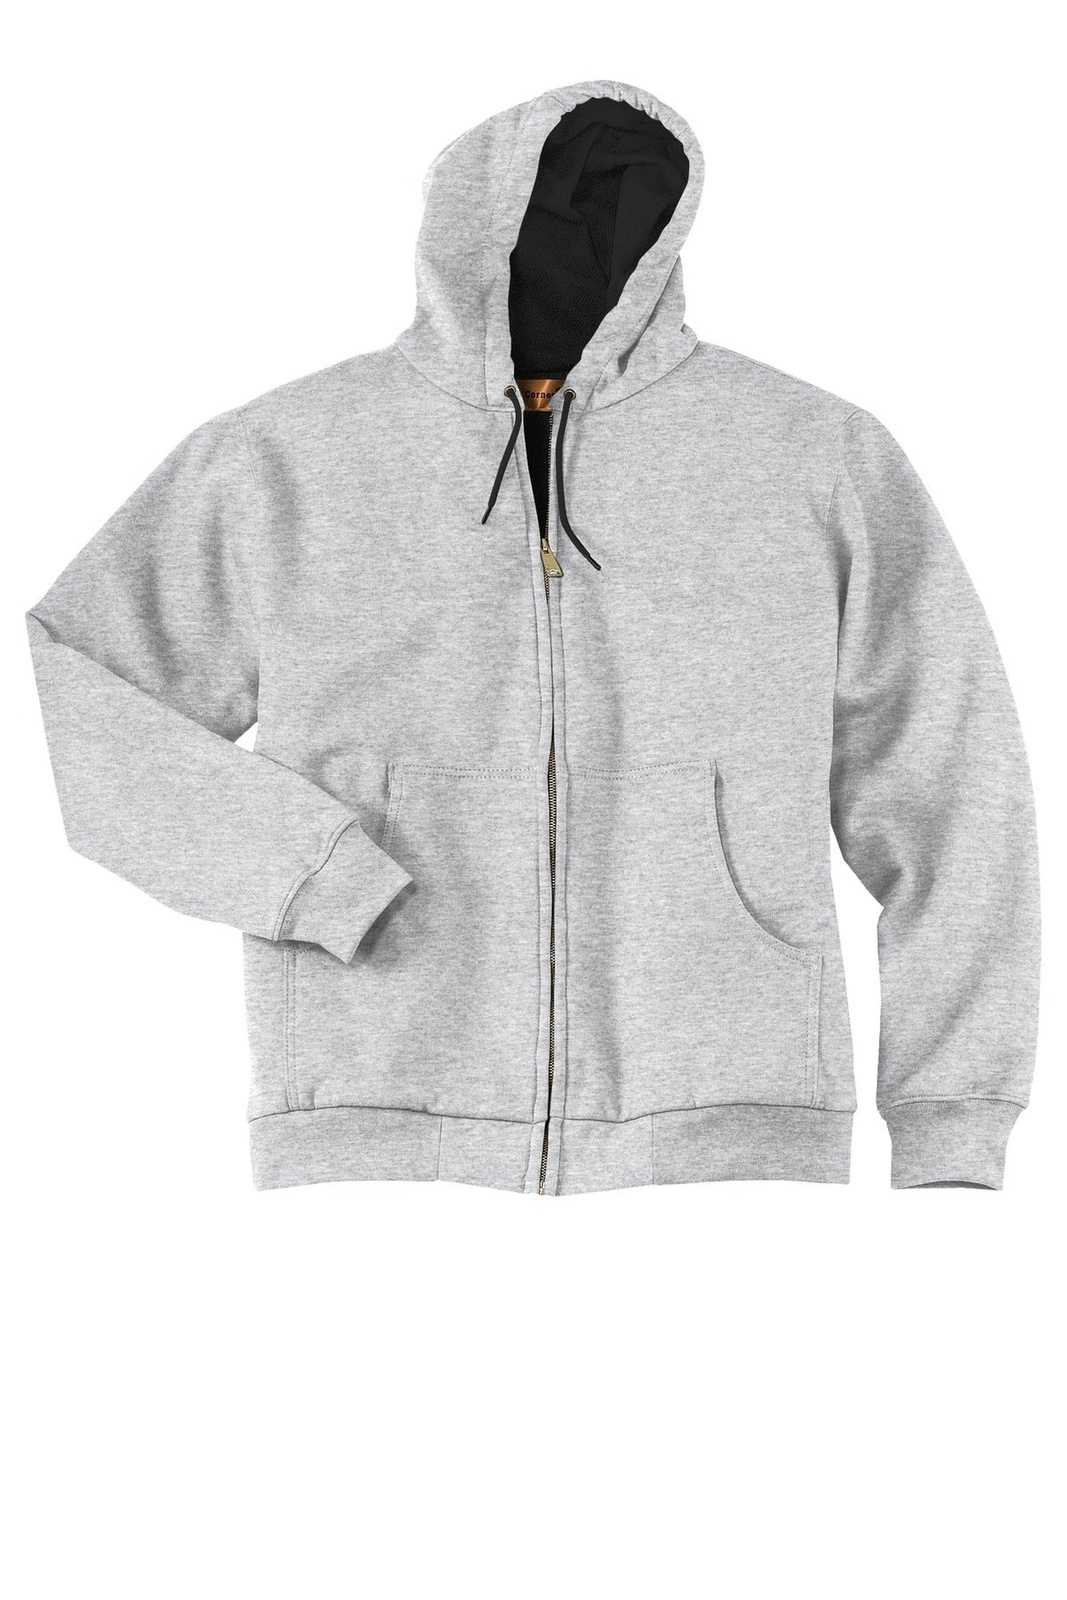 CornerStone CS620 Heavyweight Full-Zip Hooded Sweatshirt with Thermal Lining - Athletic Heather - HIT a Double - 5